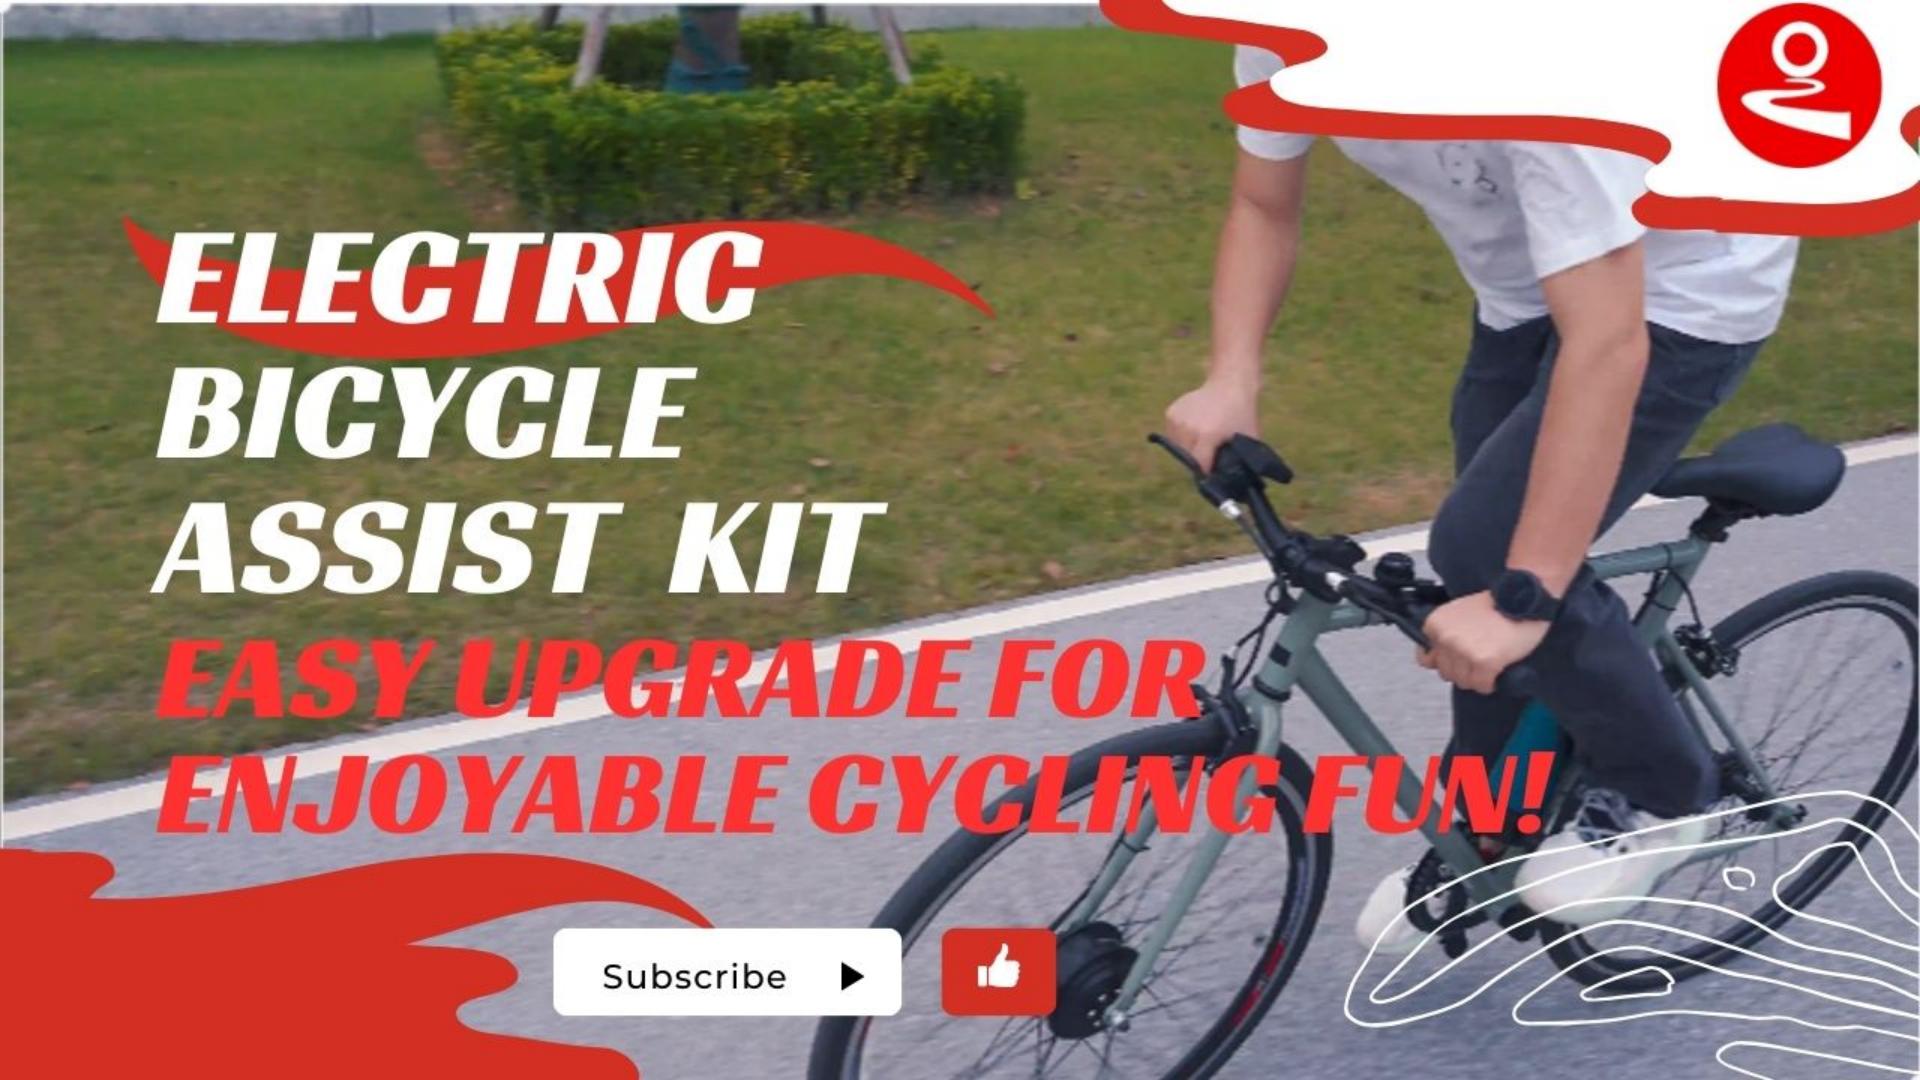 Electric Bicycle Assist New Kit - Easy Upgrade for Enjoyable Cycling Fun!